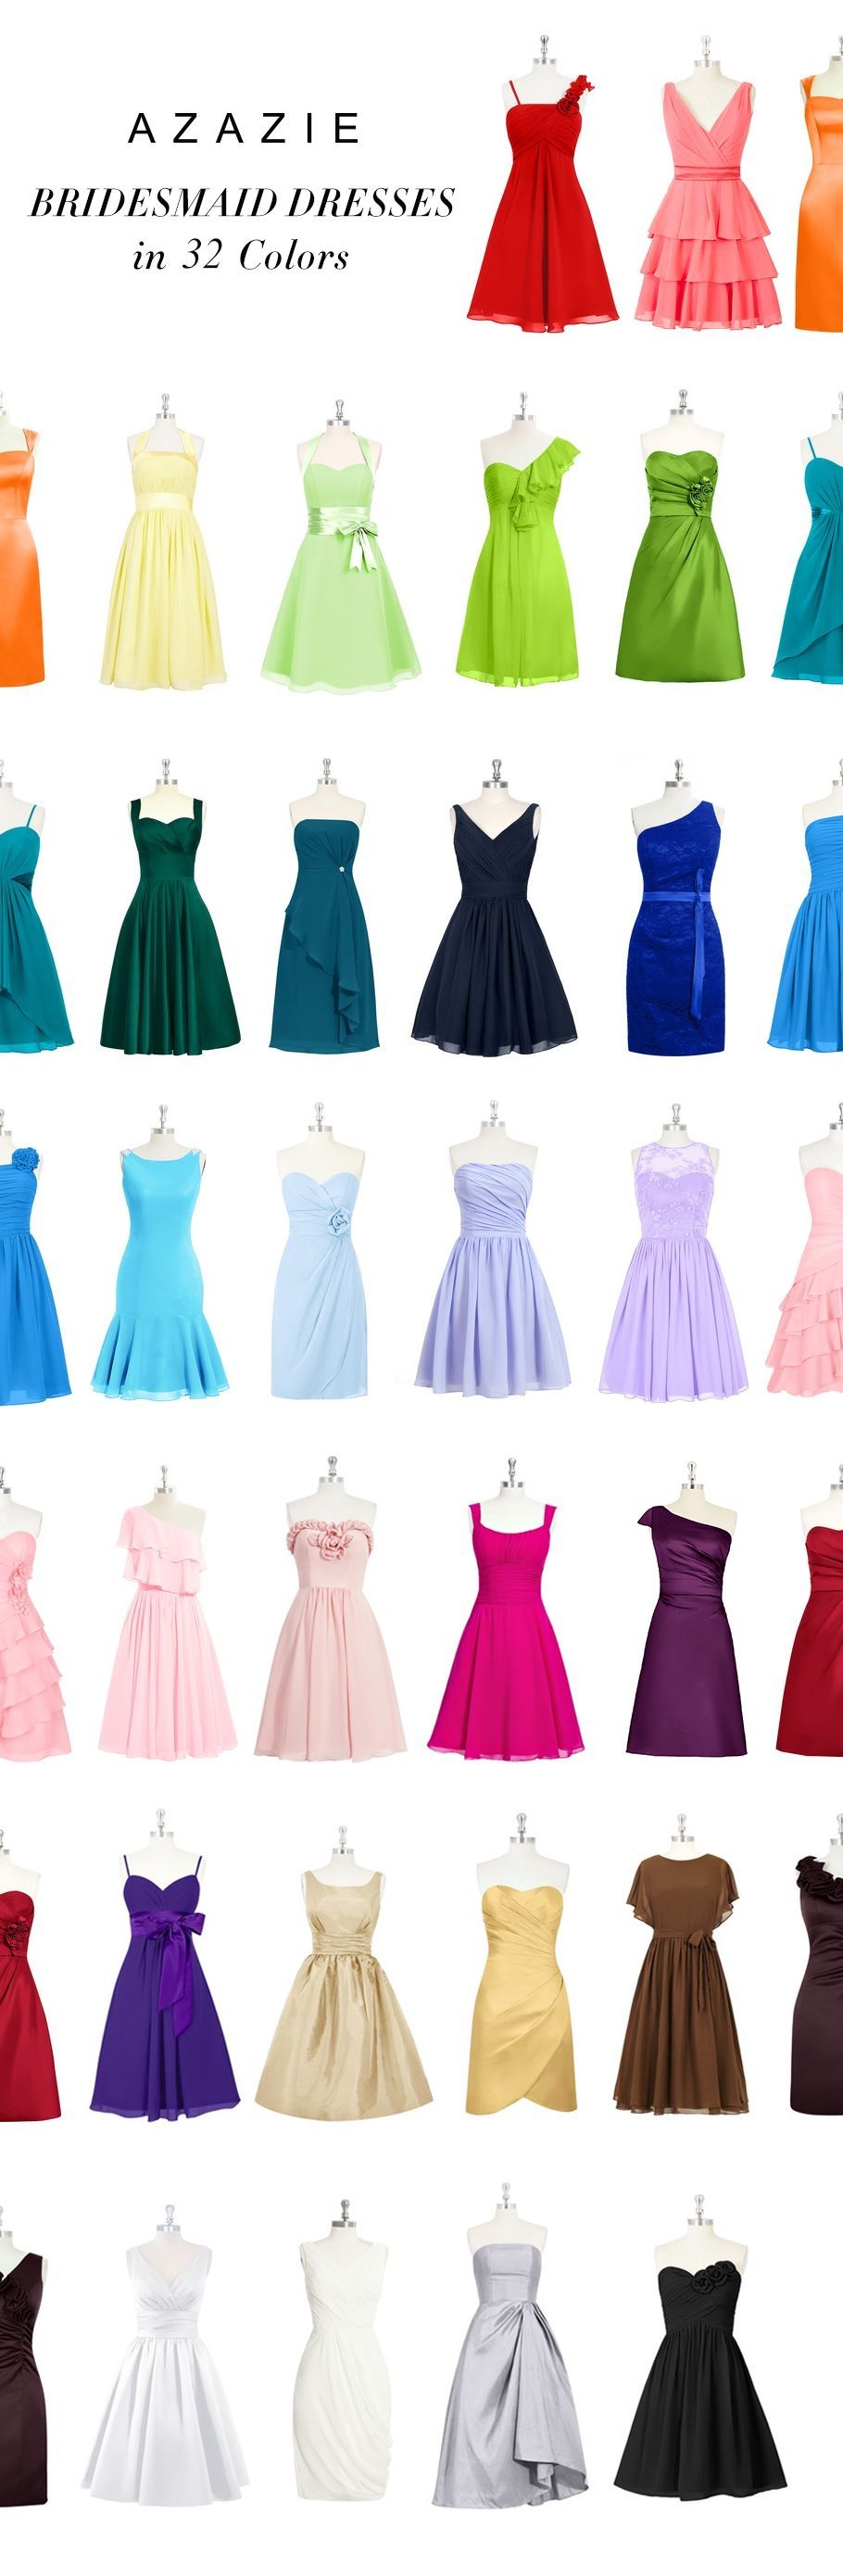 Azazie is the online destination for special occasion dresses. Find the perfect bridesmaid dresses, with over 300 styles in 32